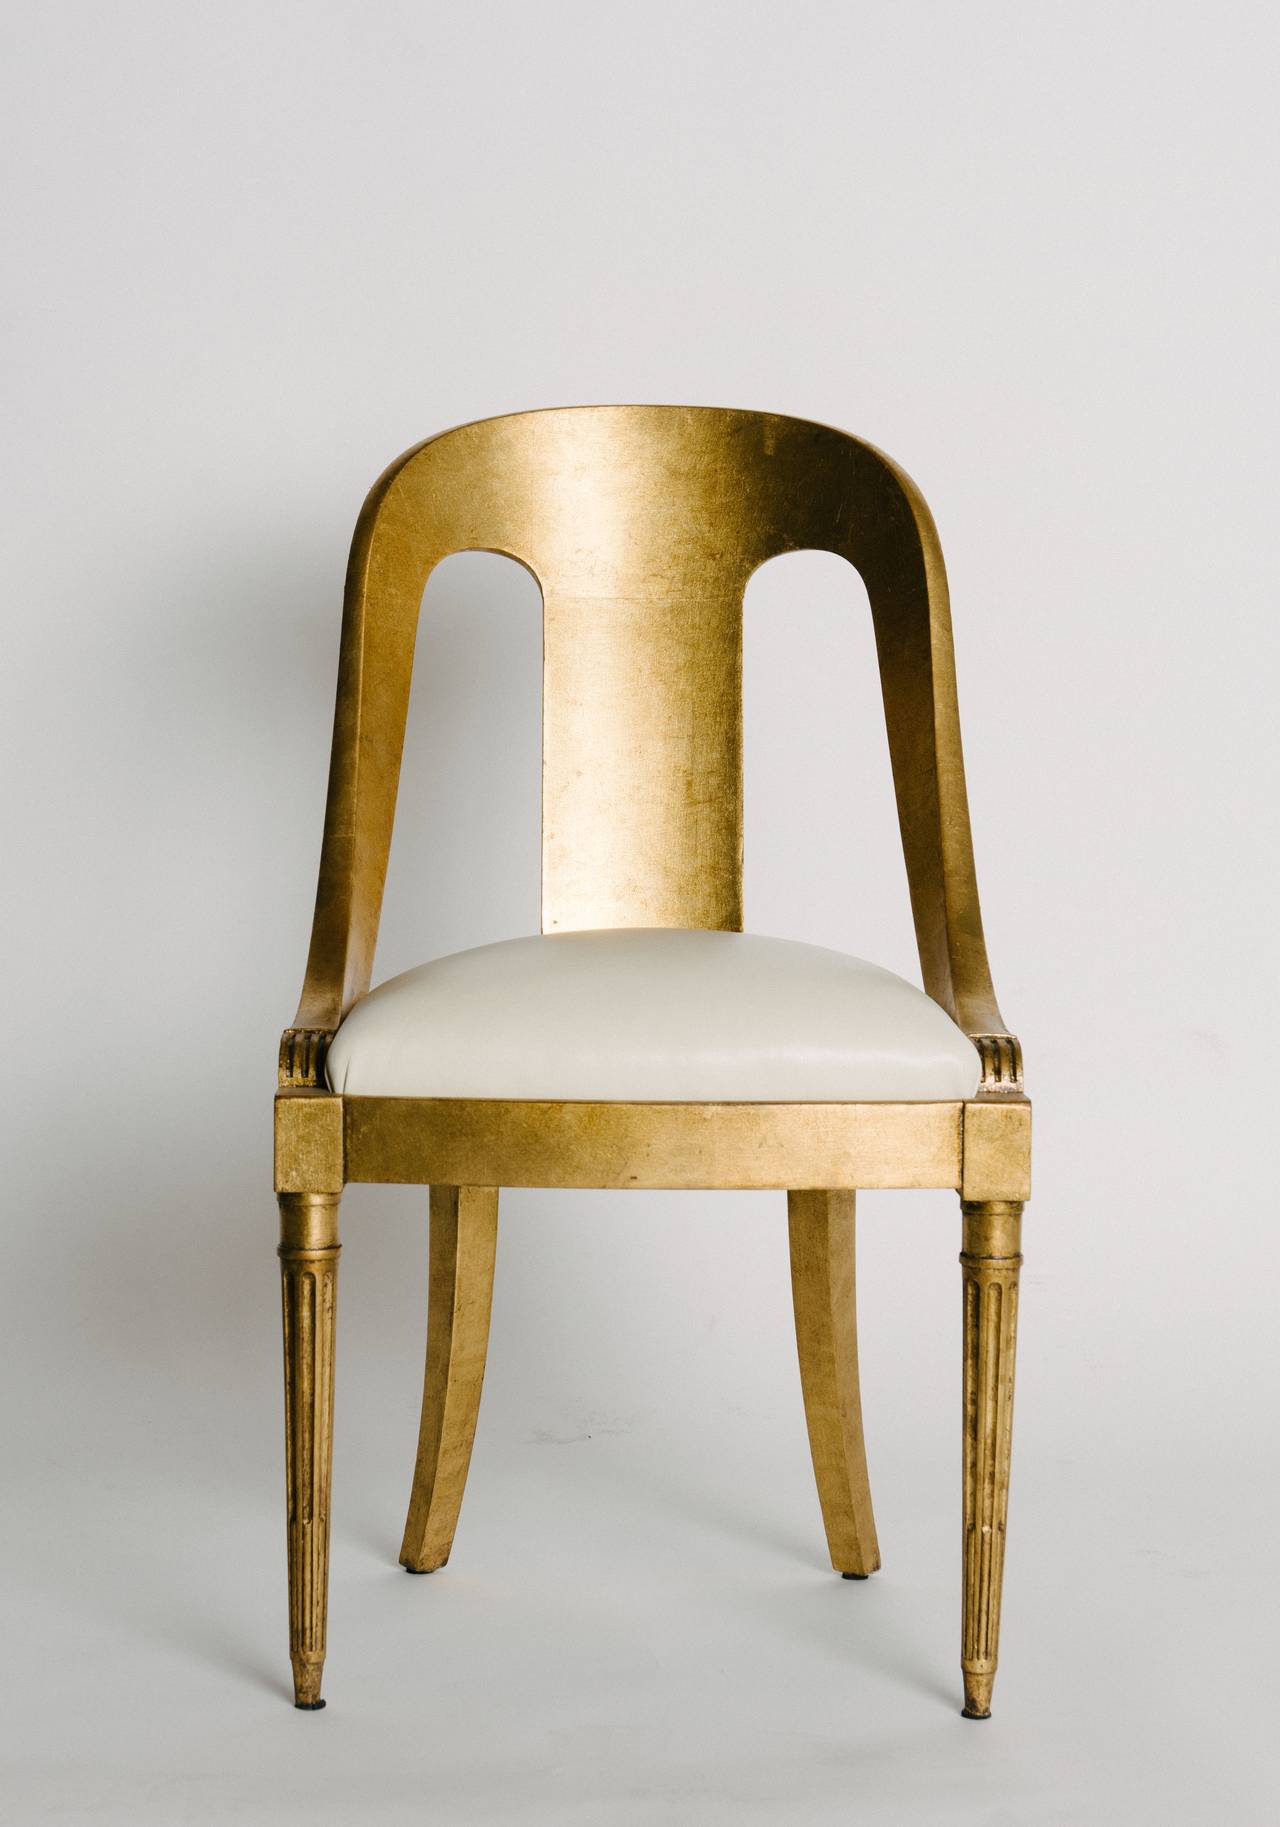 19th Century Period Charles X Gilded Chair